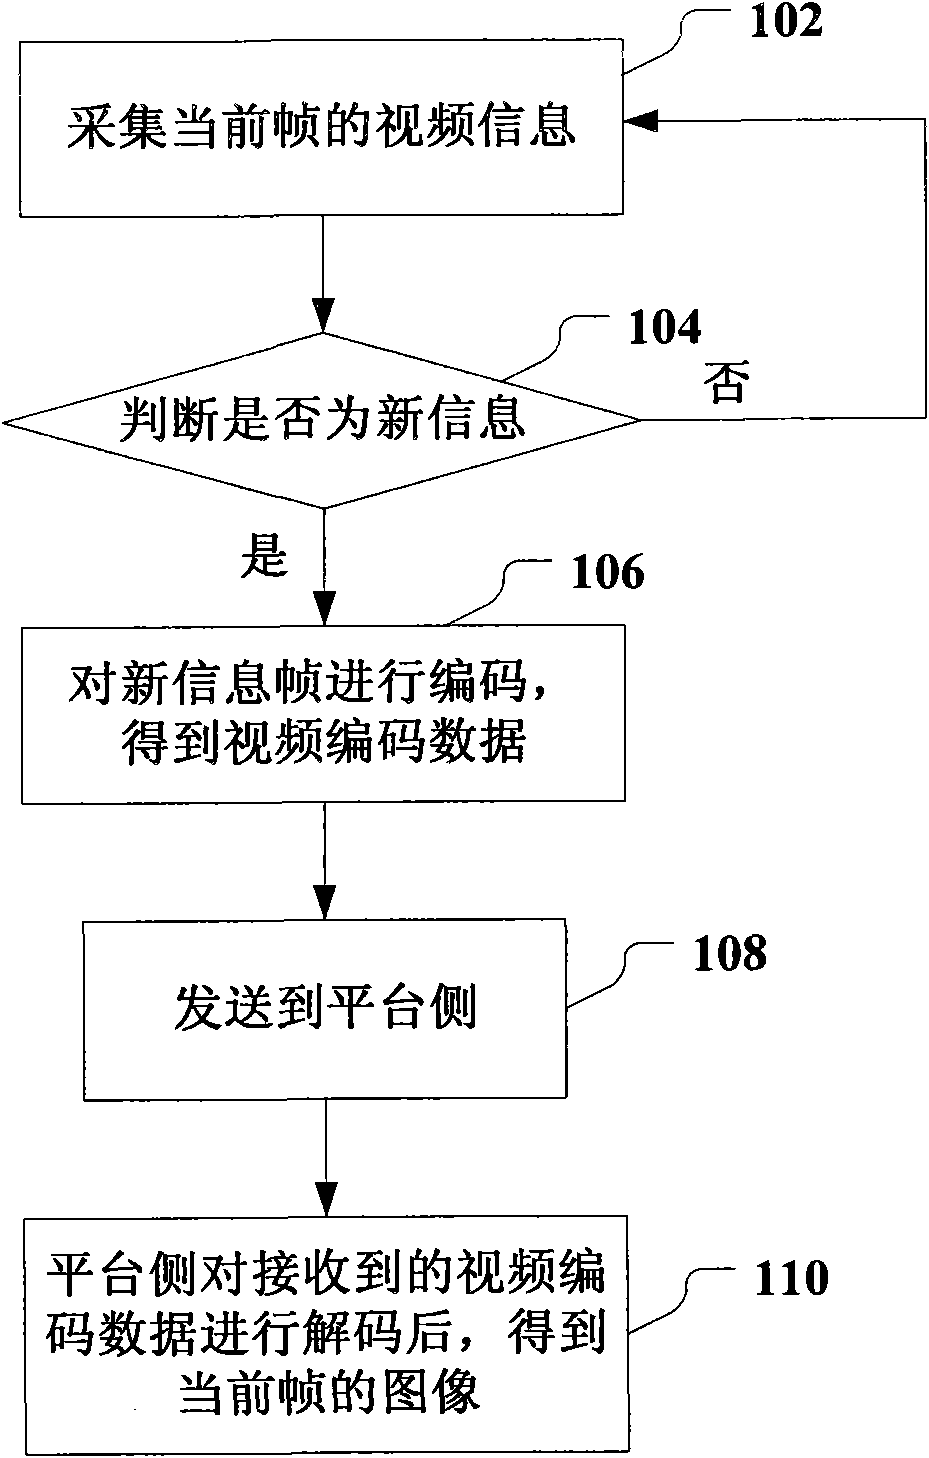 Mobile video monitoring method, device and system